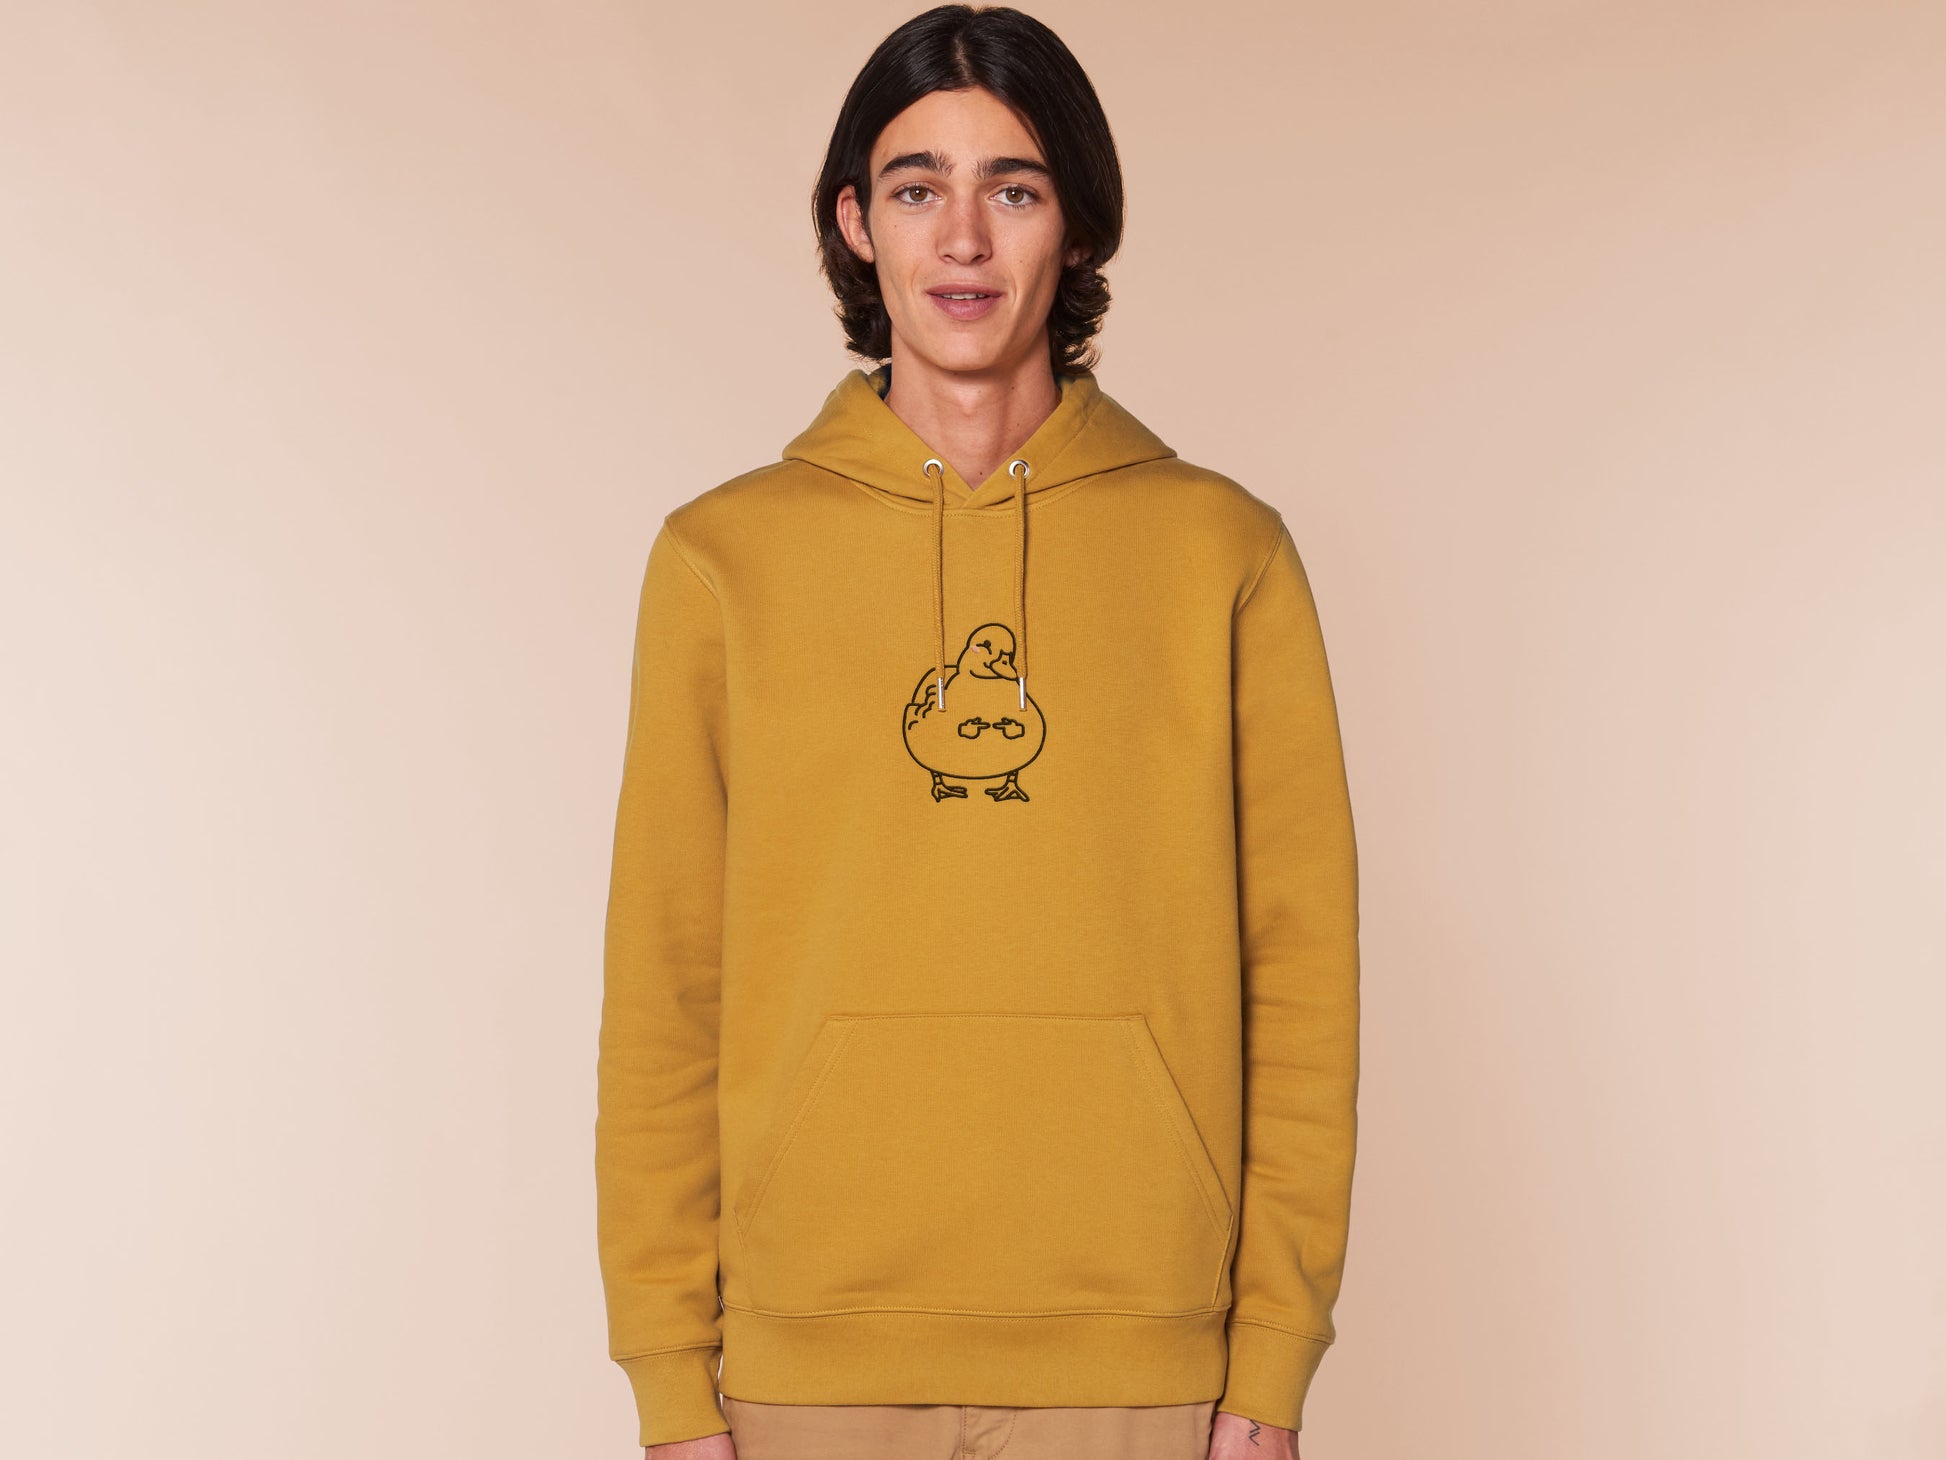 A man wearing a yellow long sleeve fleece hoodie, with an embroidered black thread design of cute blushing duck with the for me finger hand emoji symbols